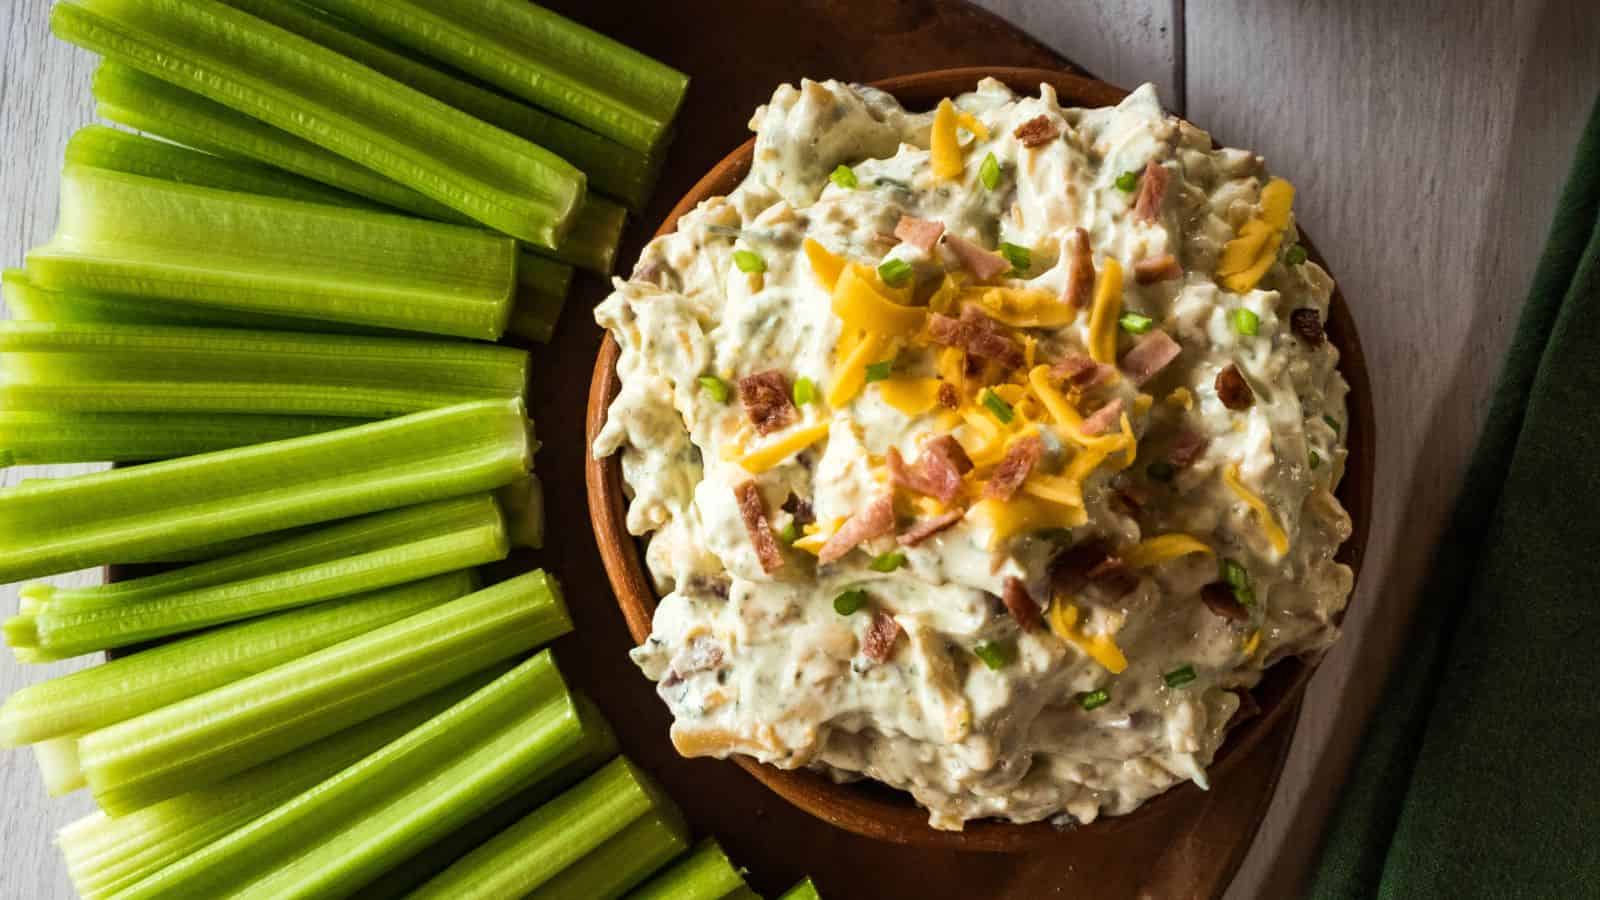 13 quick dips to make game day unforgettable